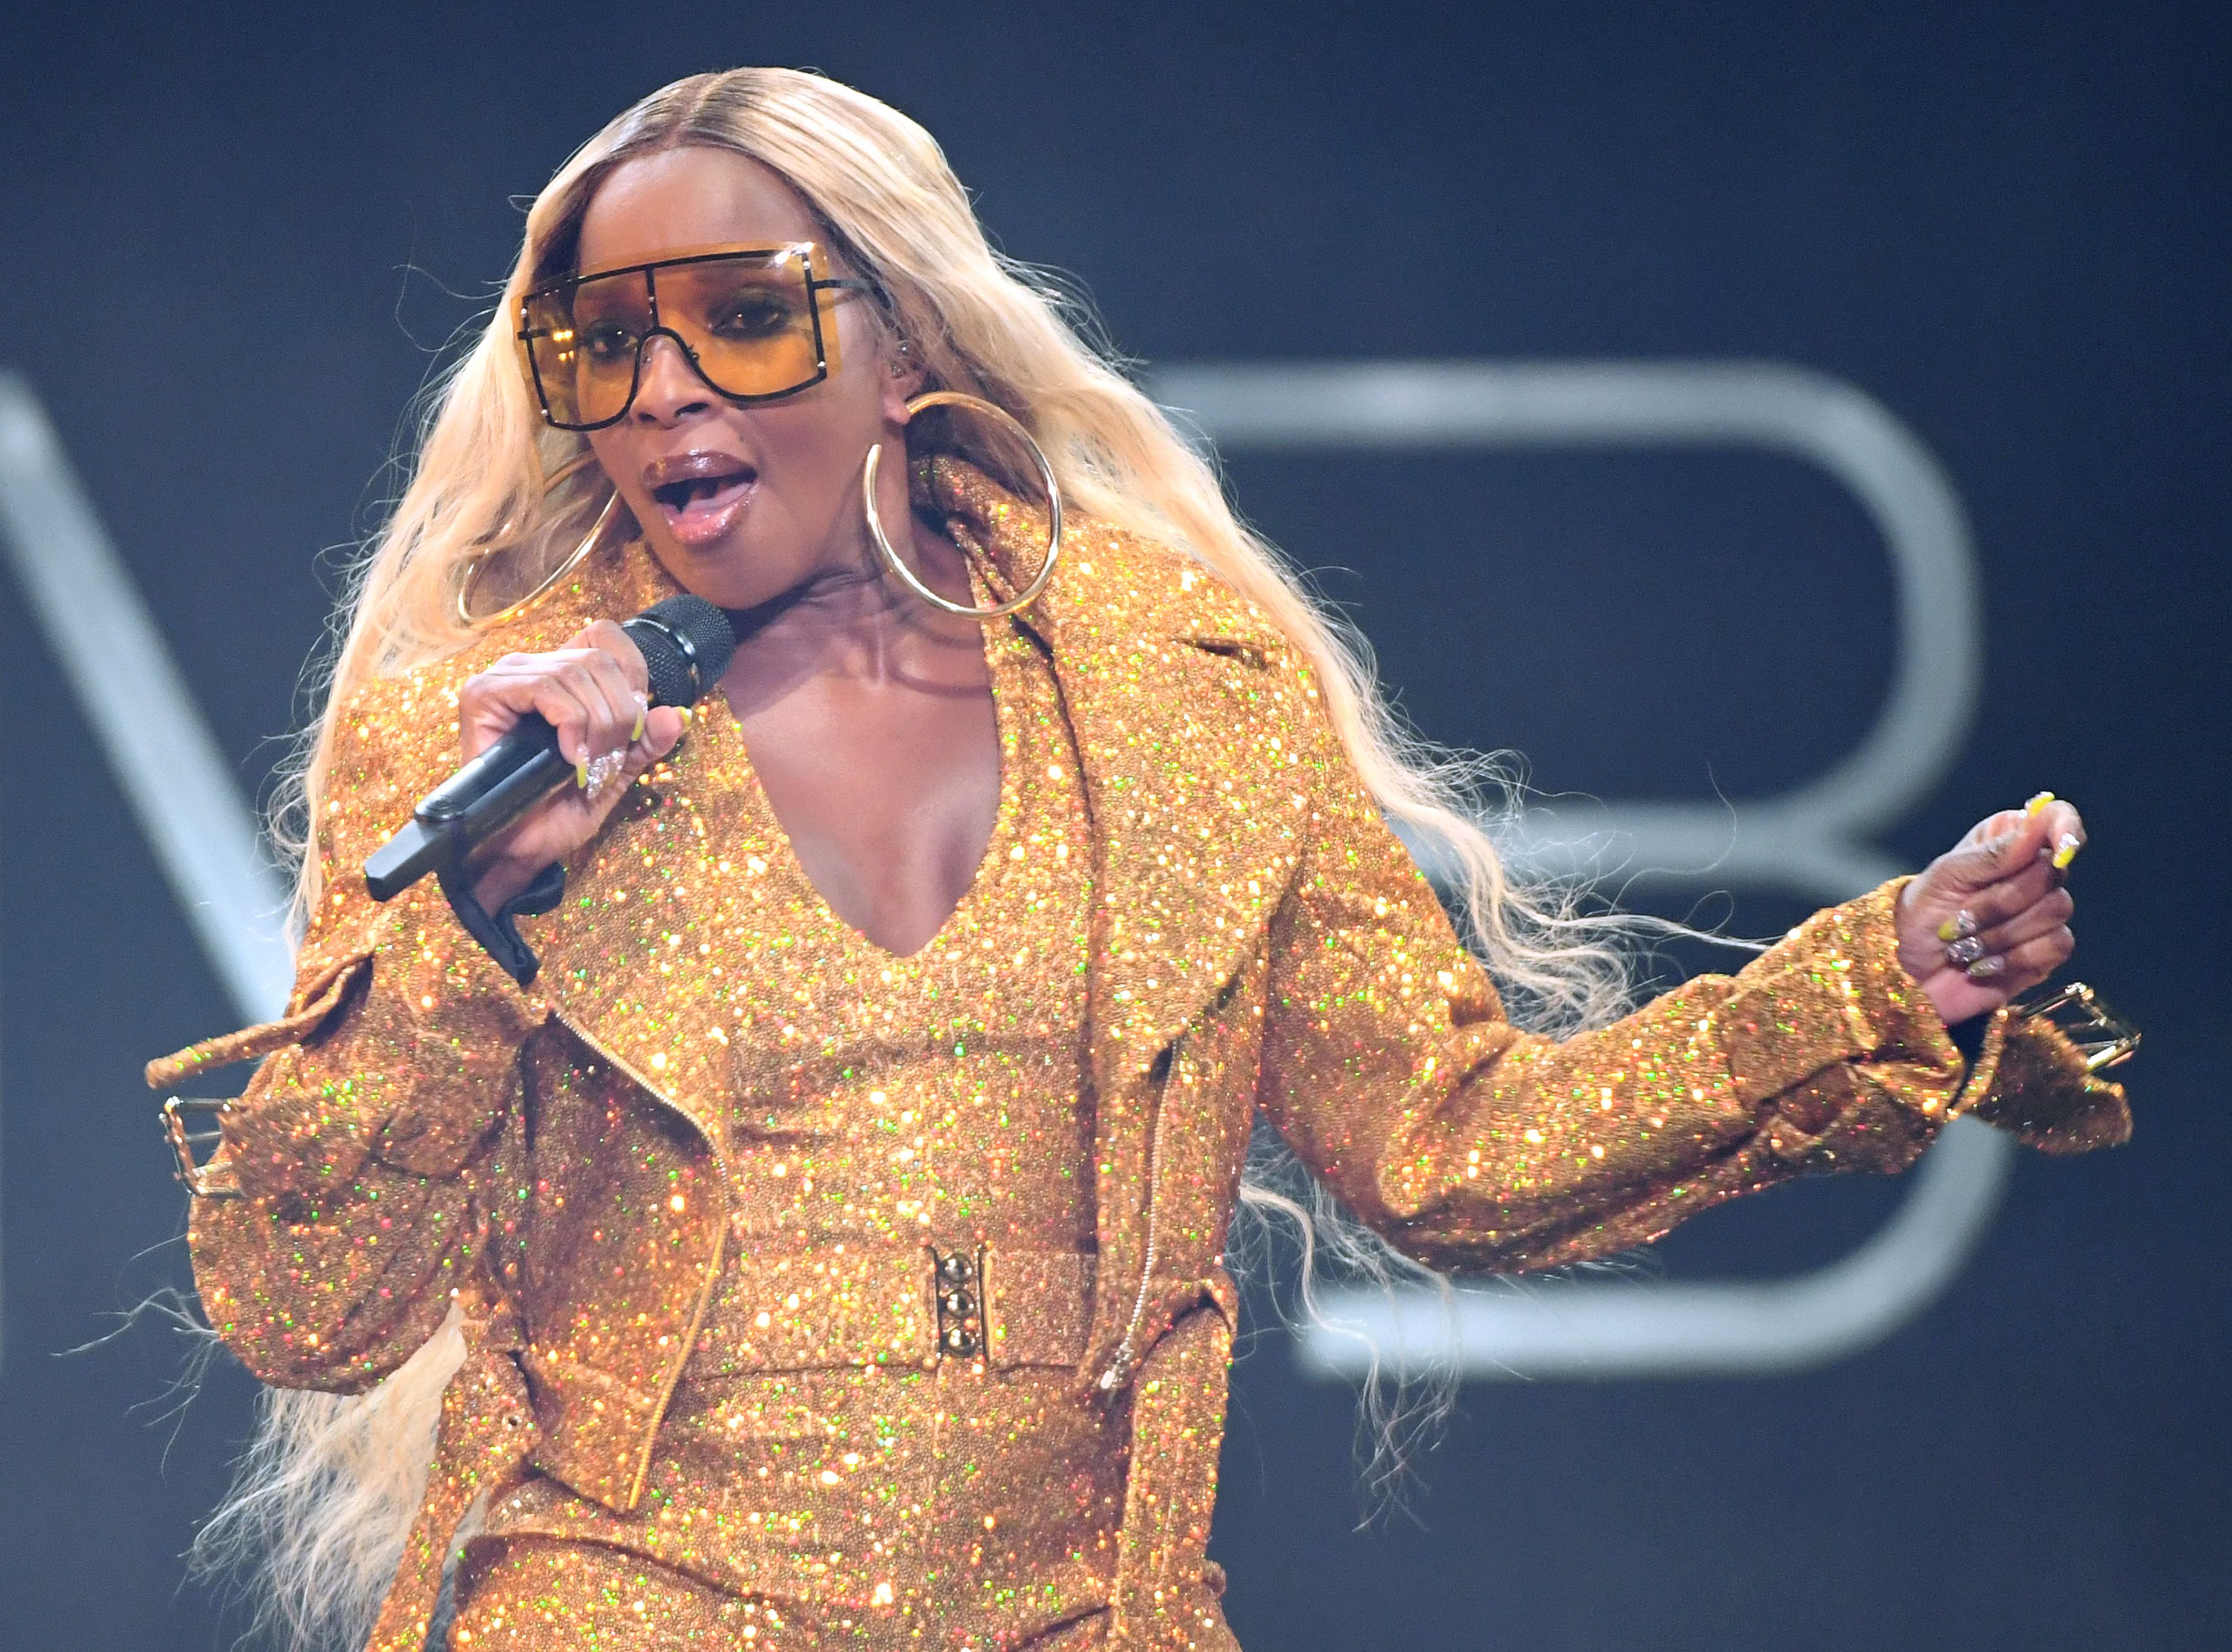 Mary J. Blige's Super Bowl Beauty 2022: All the Details Behind Her